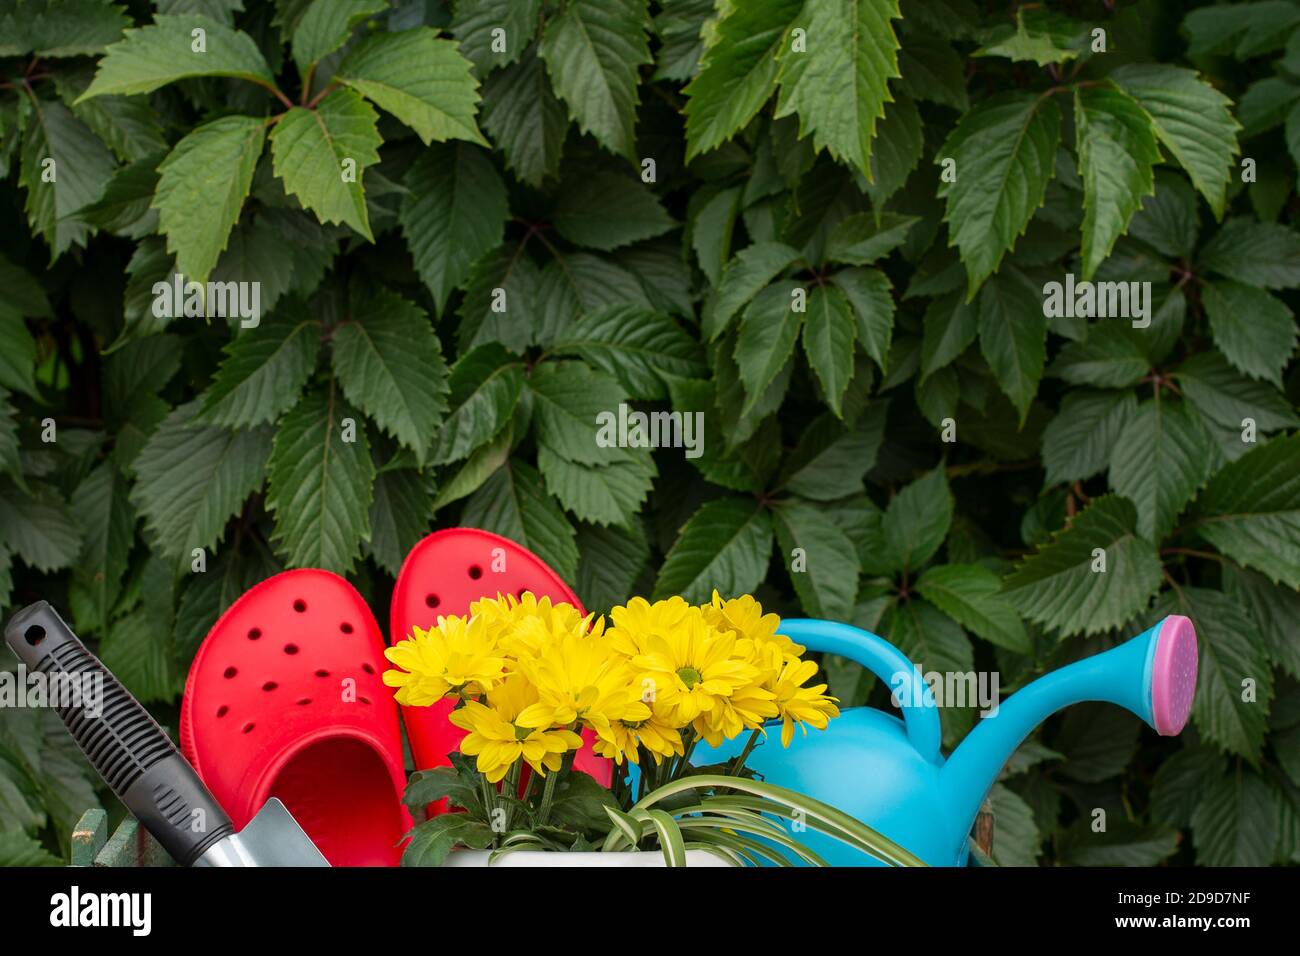 work in the garden. tools, watering can and flower in a pot on a background of green leaves. Copy space. Wild grapes. climbing plants vine Stock Photo